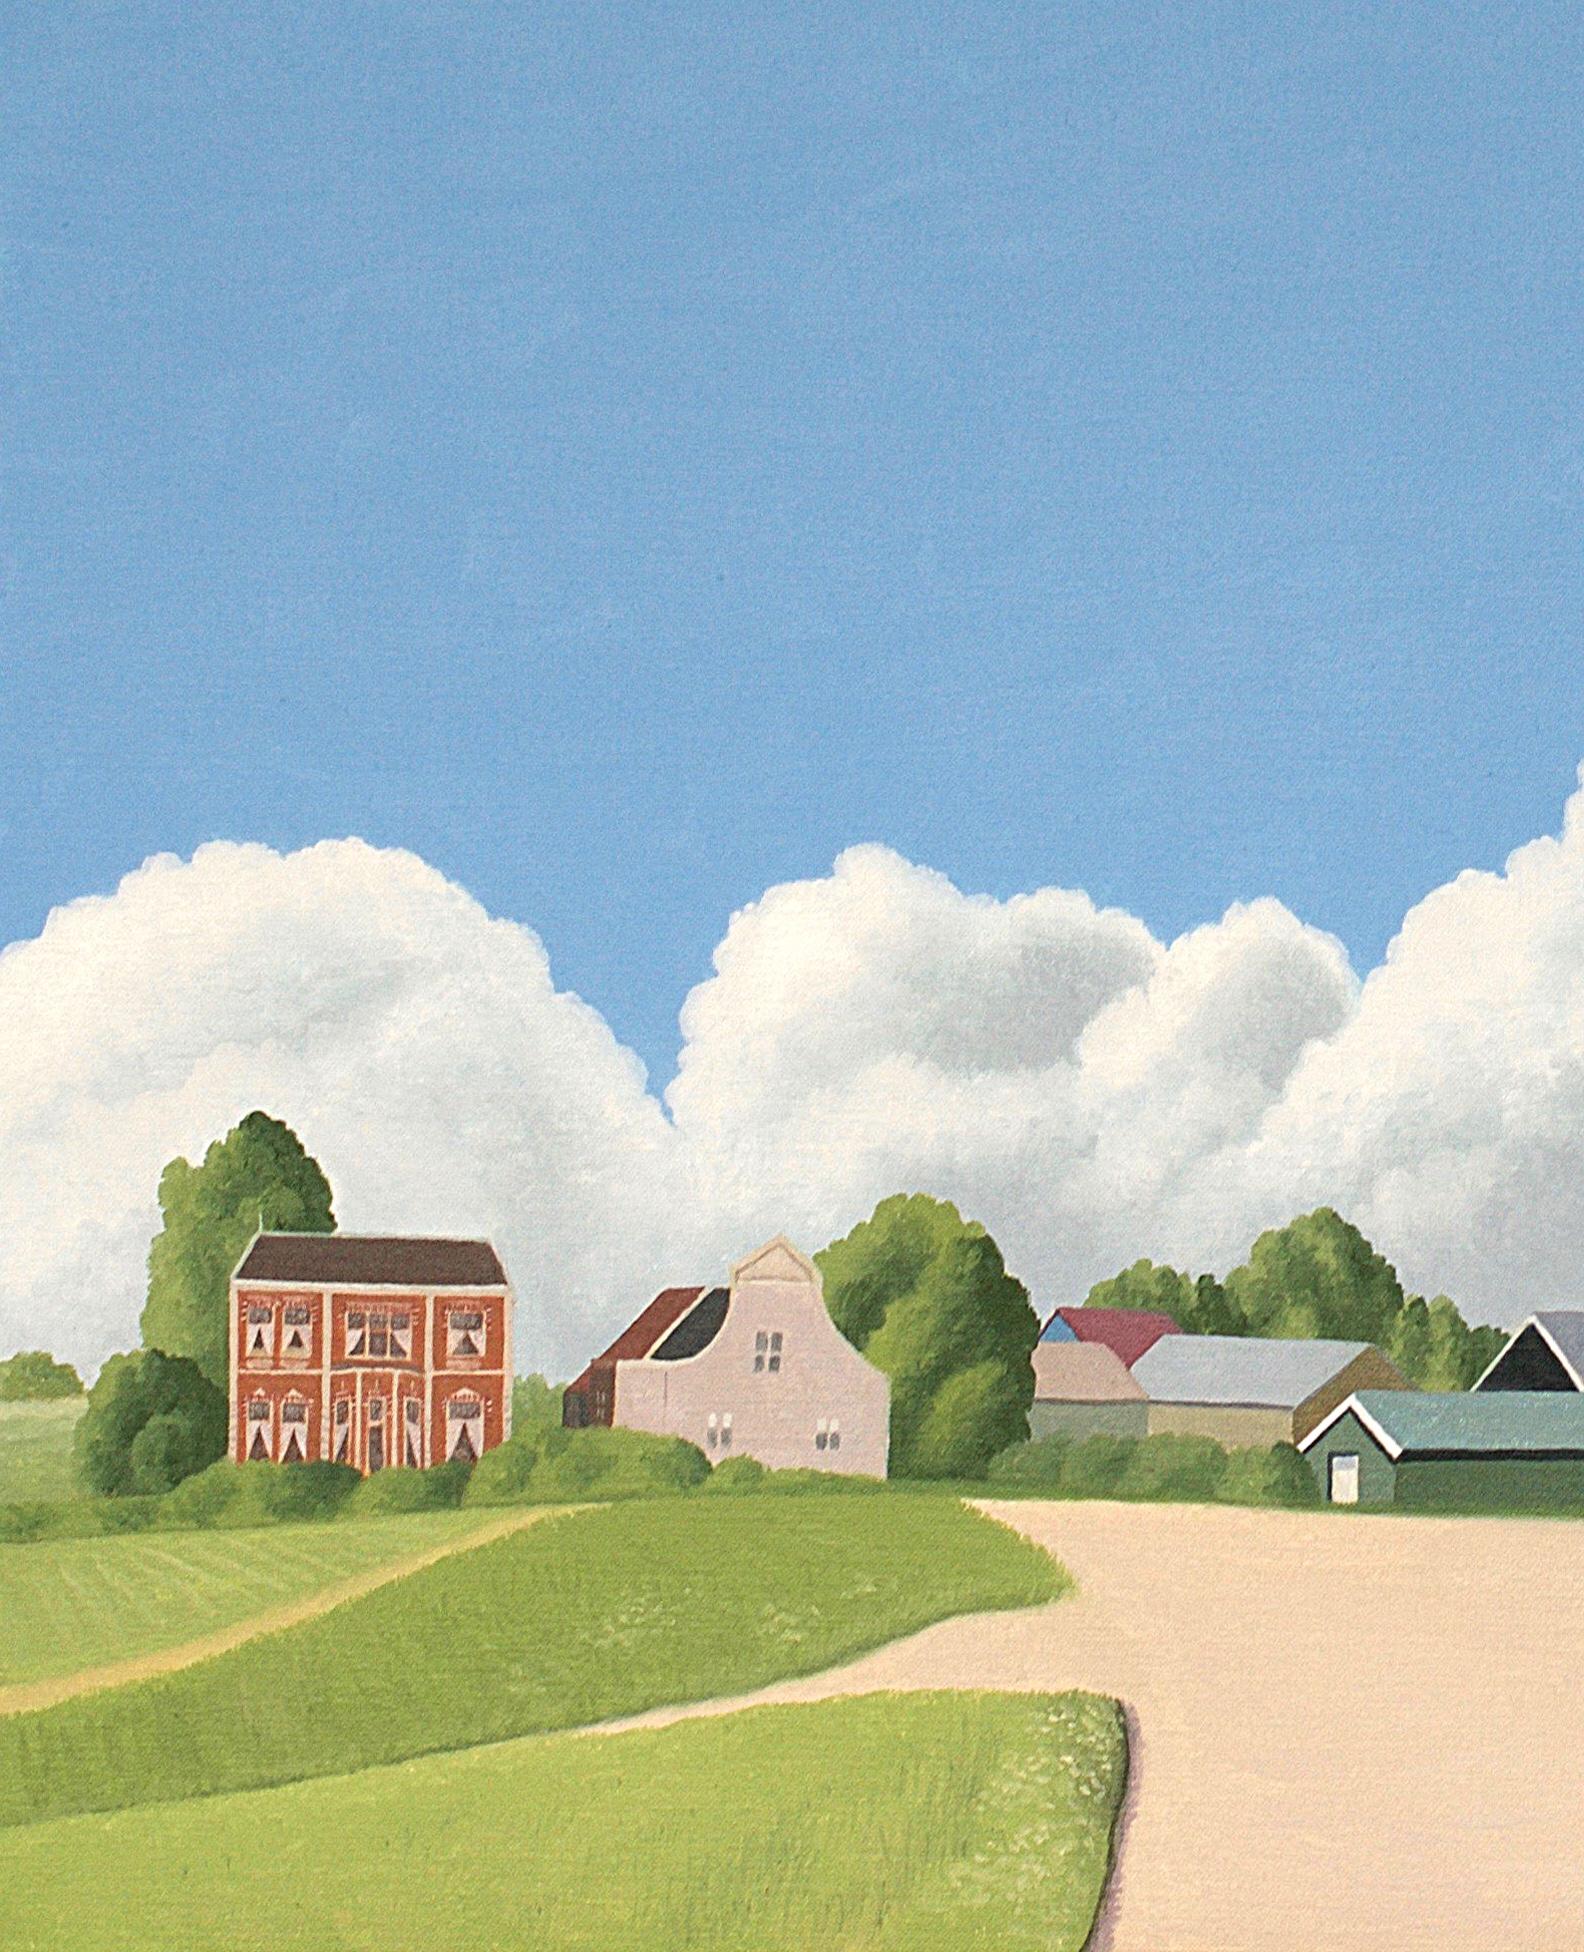 A farm stands before you on the horizon. A windmill majestically slices the blue sky. A bird, painted in taut brushstrokes, struts on a branch. These are tranquil images; horizon far in the distance. Jeroen Allart’s paintings are becoming more